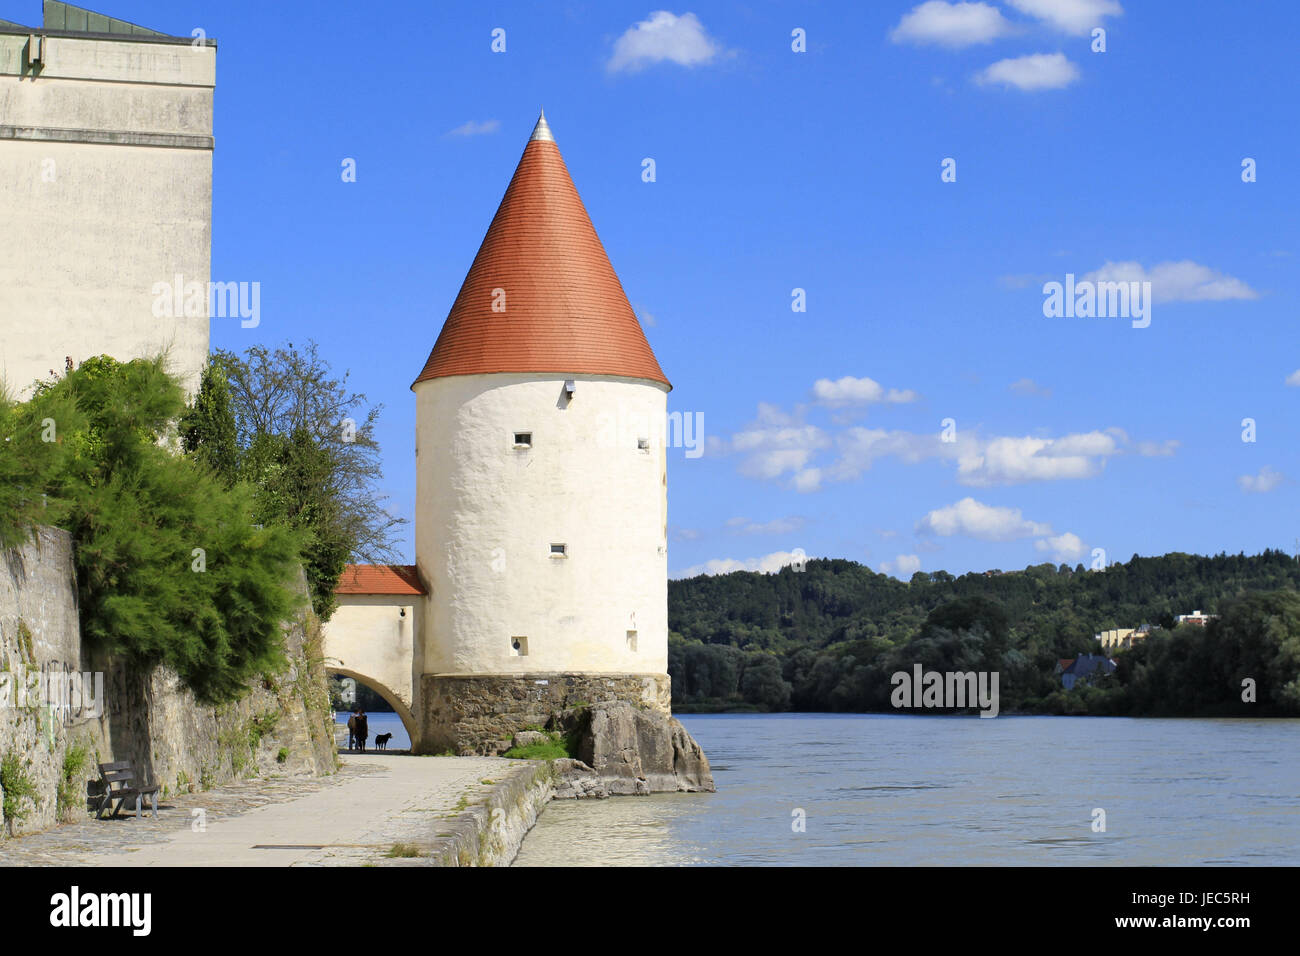 Germany, Lower Bavaria, Passau, Innufer, Schaiblingsturm, 3 rivers town, Lower Bavaria, Europe, summer, place of interest, town, city centre, tourism, architecture, structure, building, river, waters, town view, Inn, tower, person, Bavaria, Stock Photo